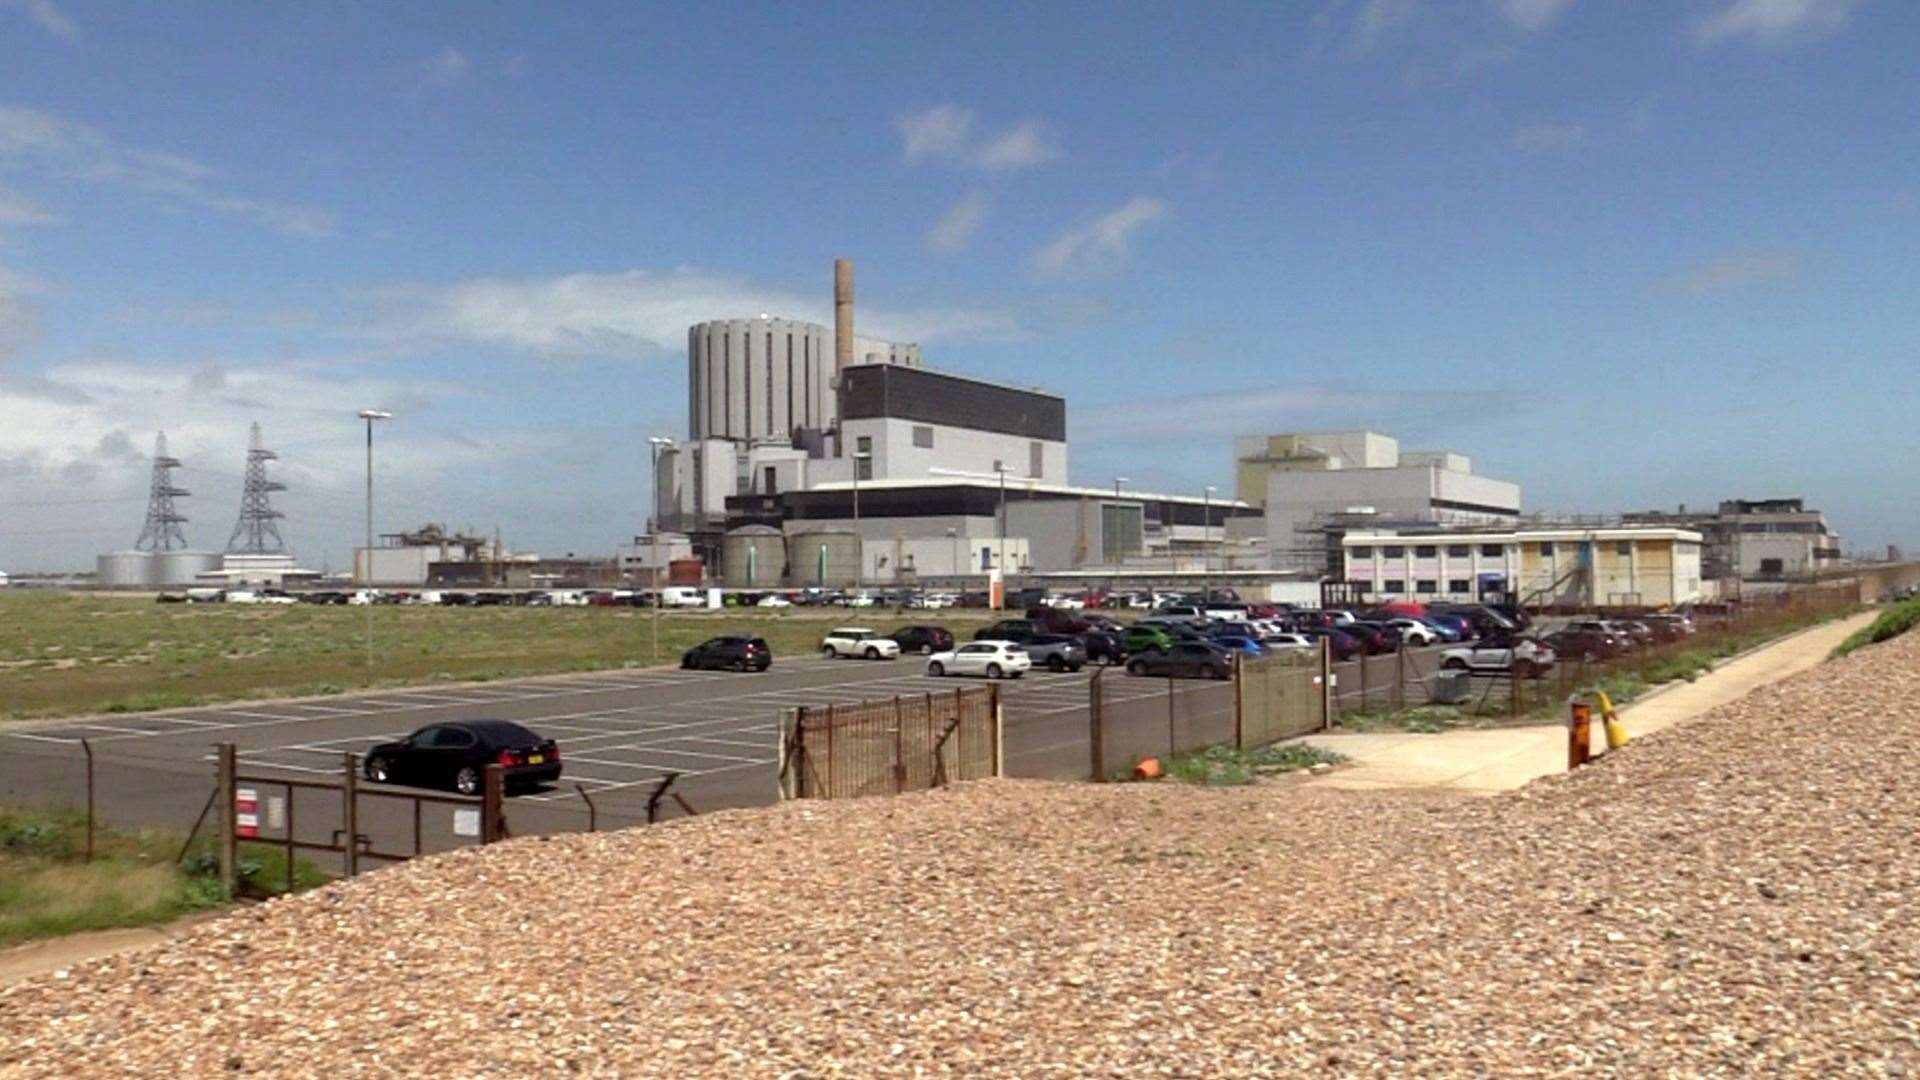 Dungeness power station from the beach